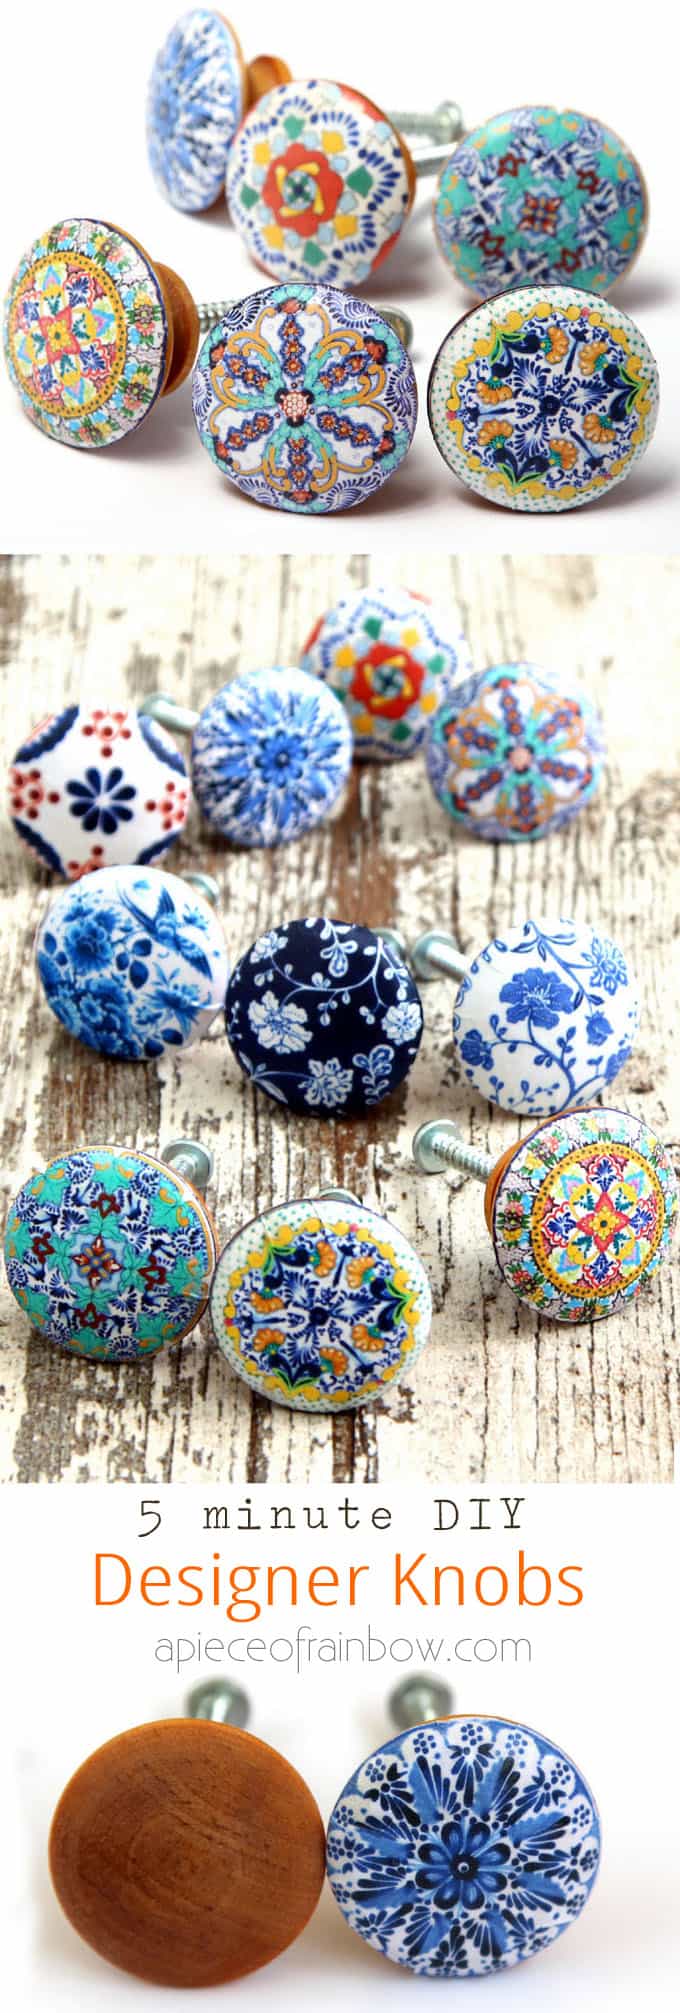 Anthropologie worthy DIY cabinet or door knobs that look like hand painted designer ceramic knobs! Download beautiful designs to make your own set easily! - A Piece of Rainbow